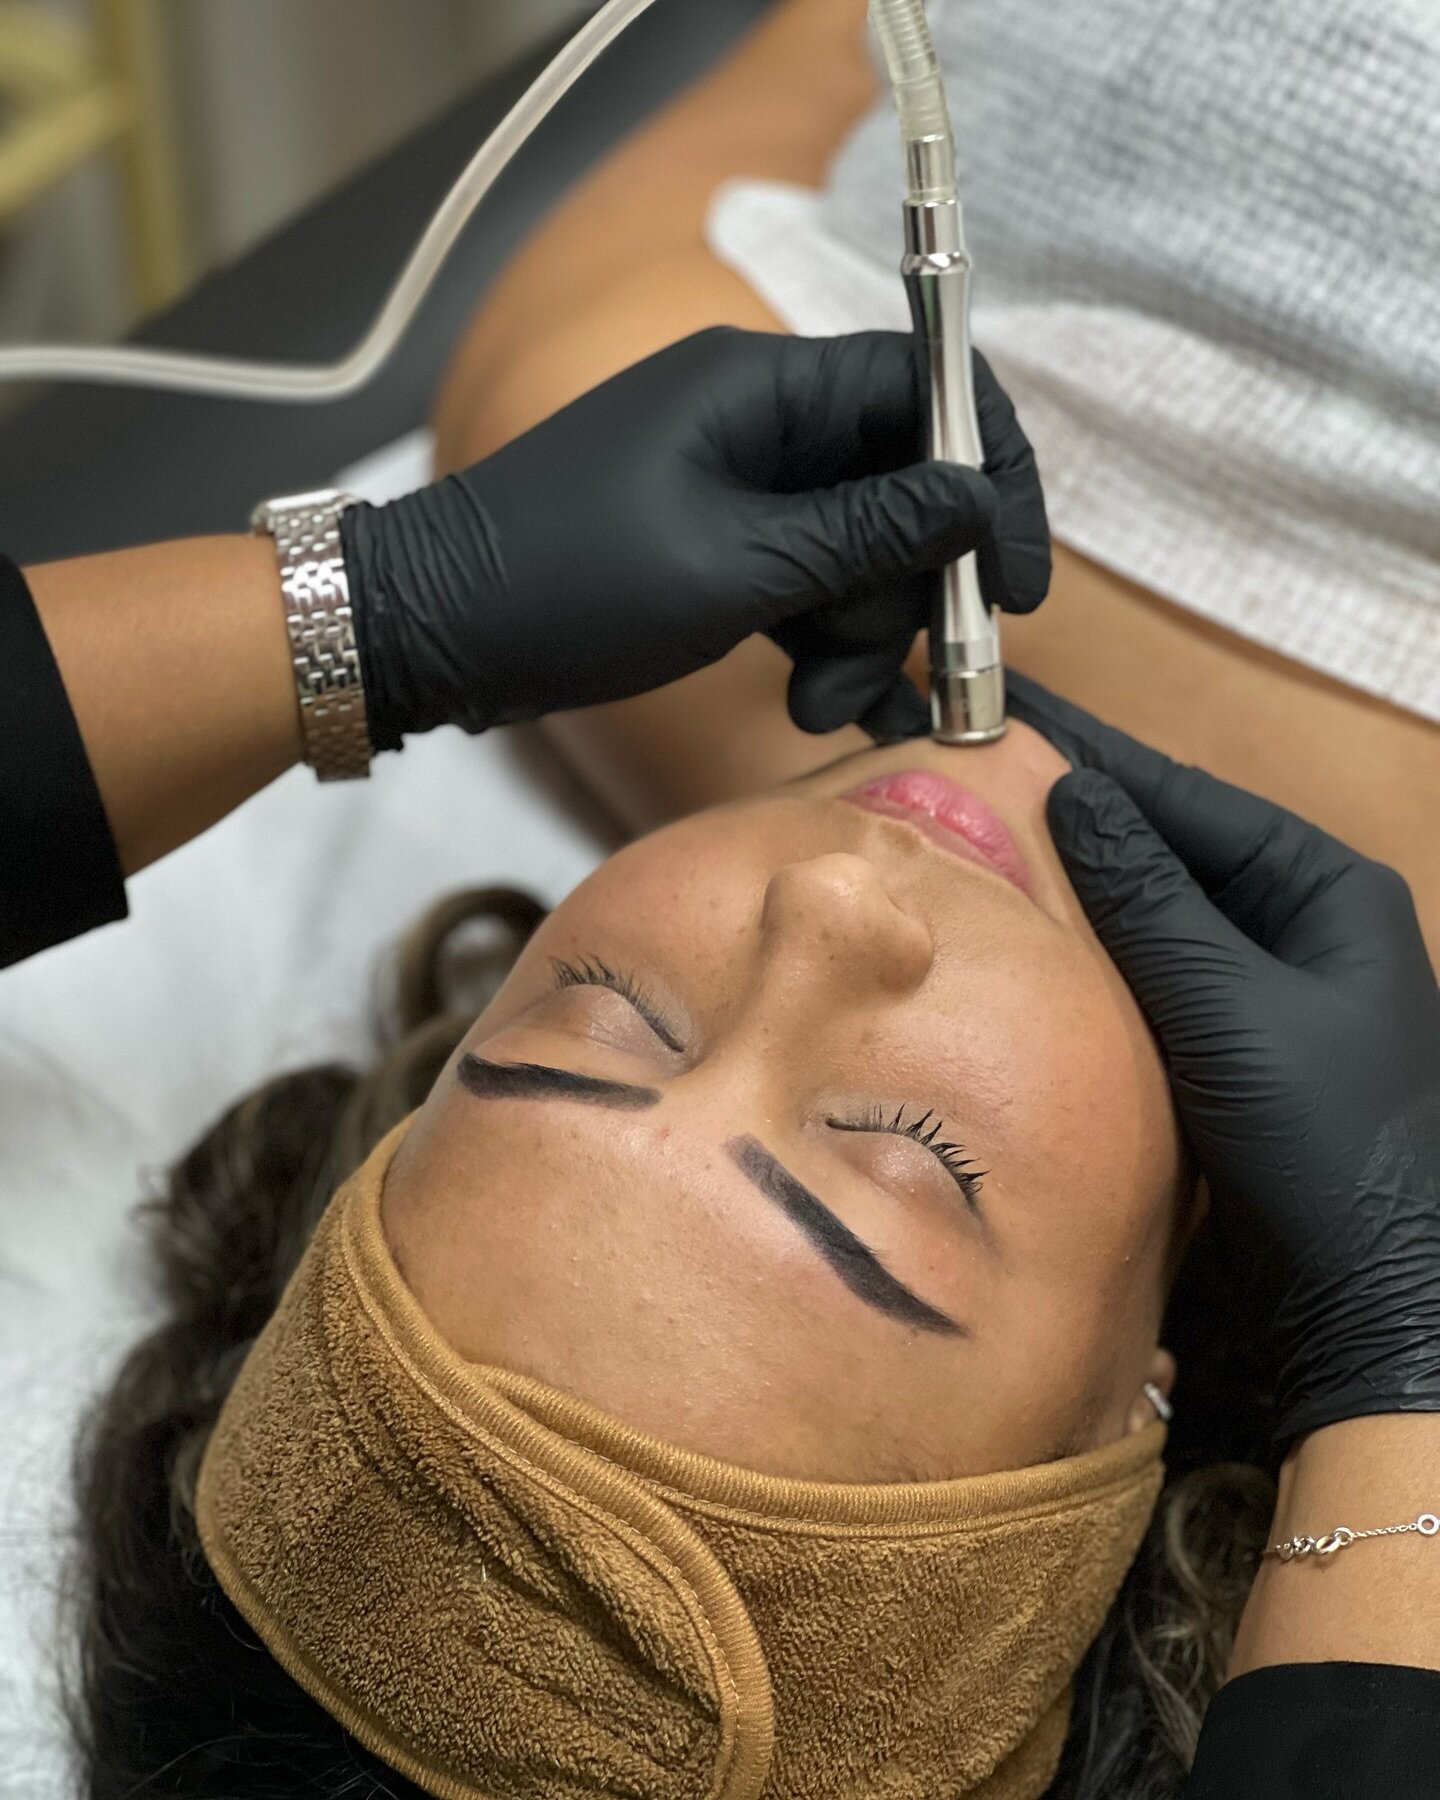 ✨Glow up with our Microdermabrasion Magic! ✨ Unveil smoother, radiant skin as our microdermabrasion treatment buffs away those dull layers. Say goodbye to rough texture and hello to a fresh, rejuvenated complexion. 🌞

Vitamin C available as an add-o